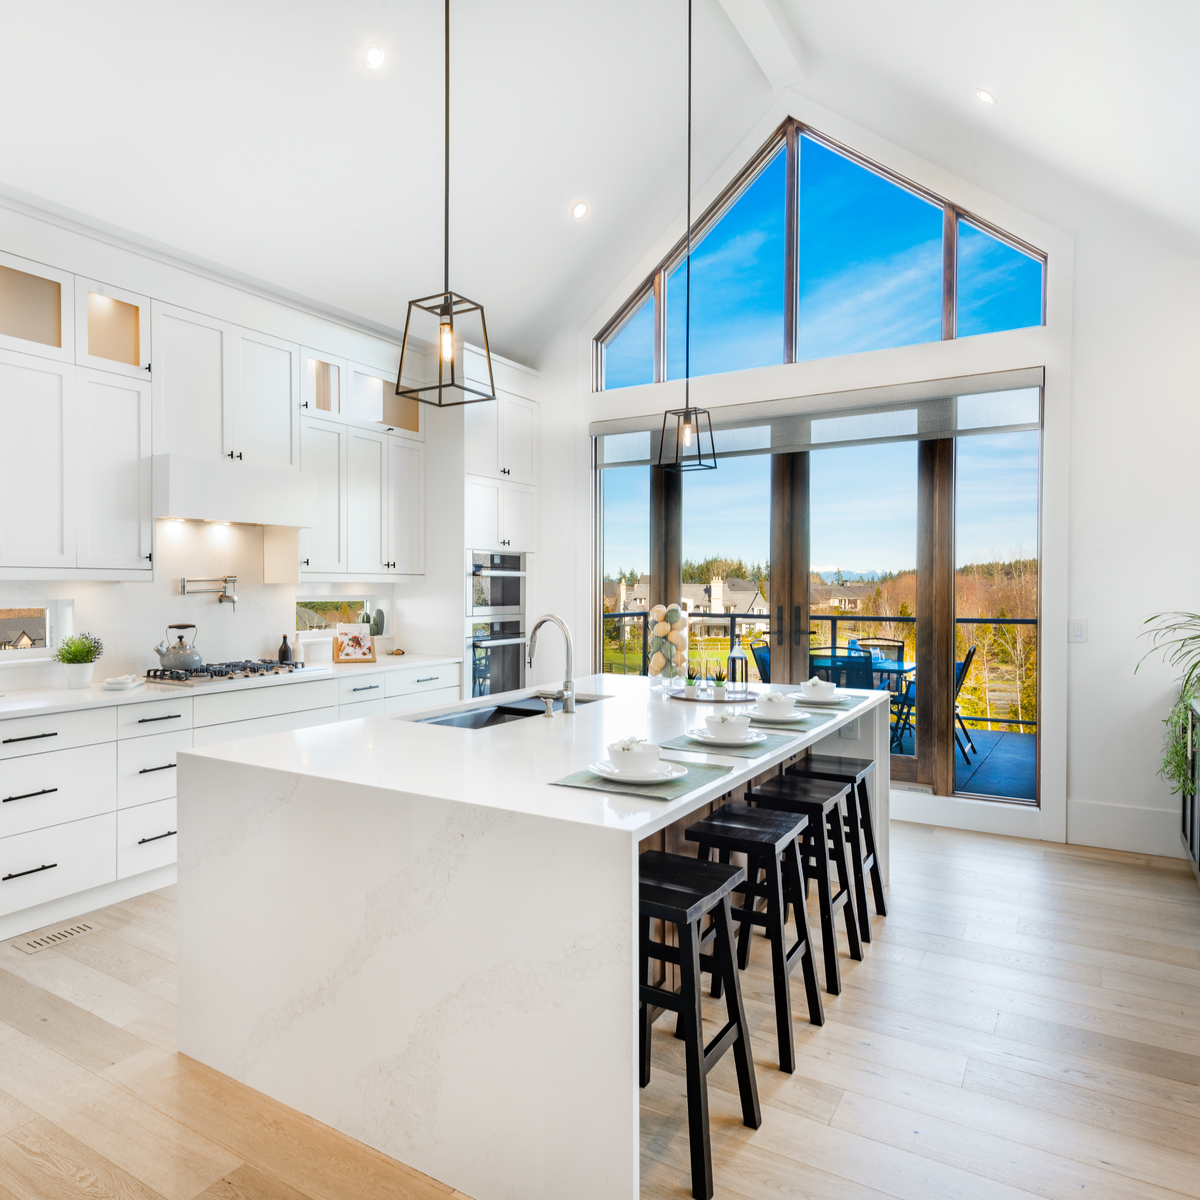 Professional Window Installations and Repairs for Your Dream Kitchen